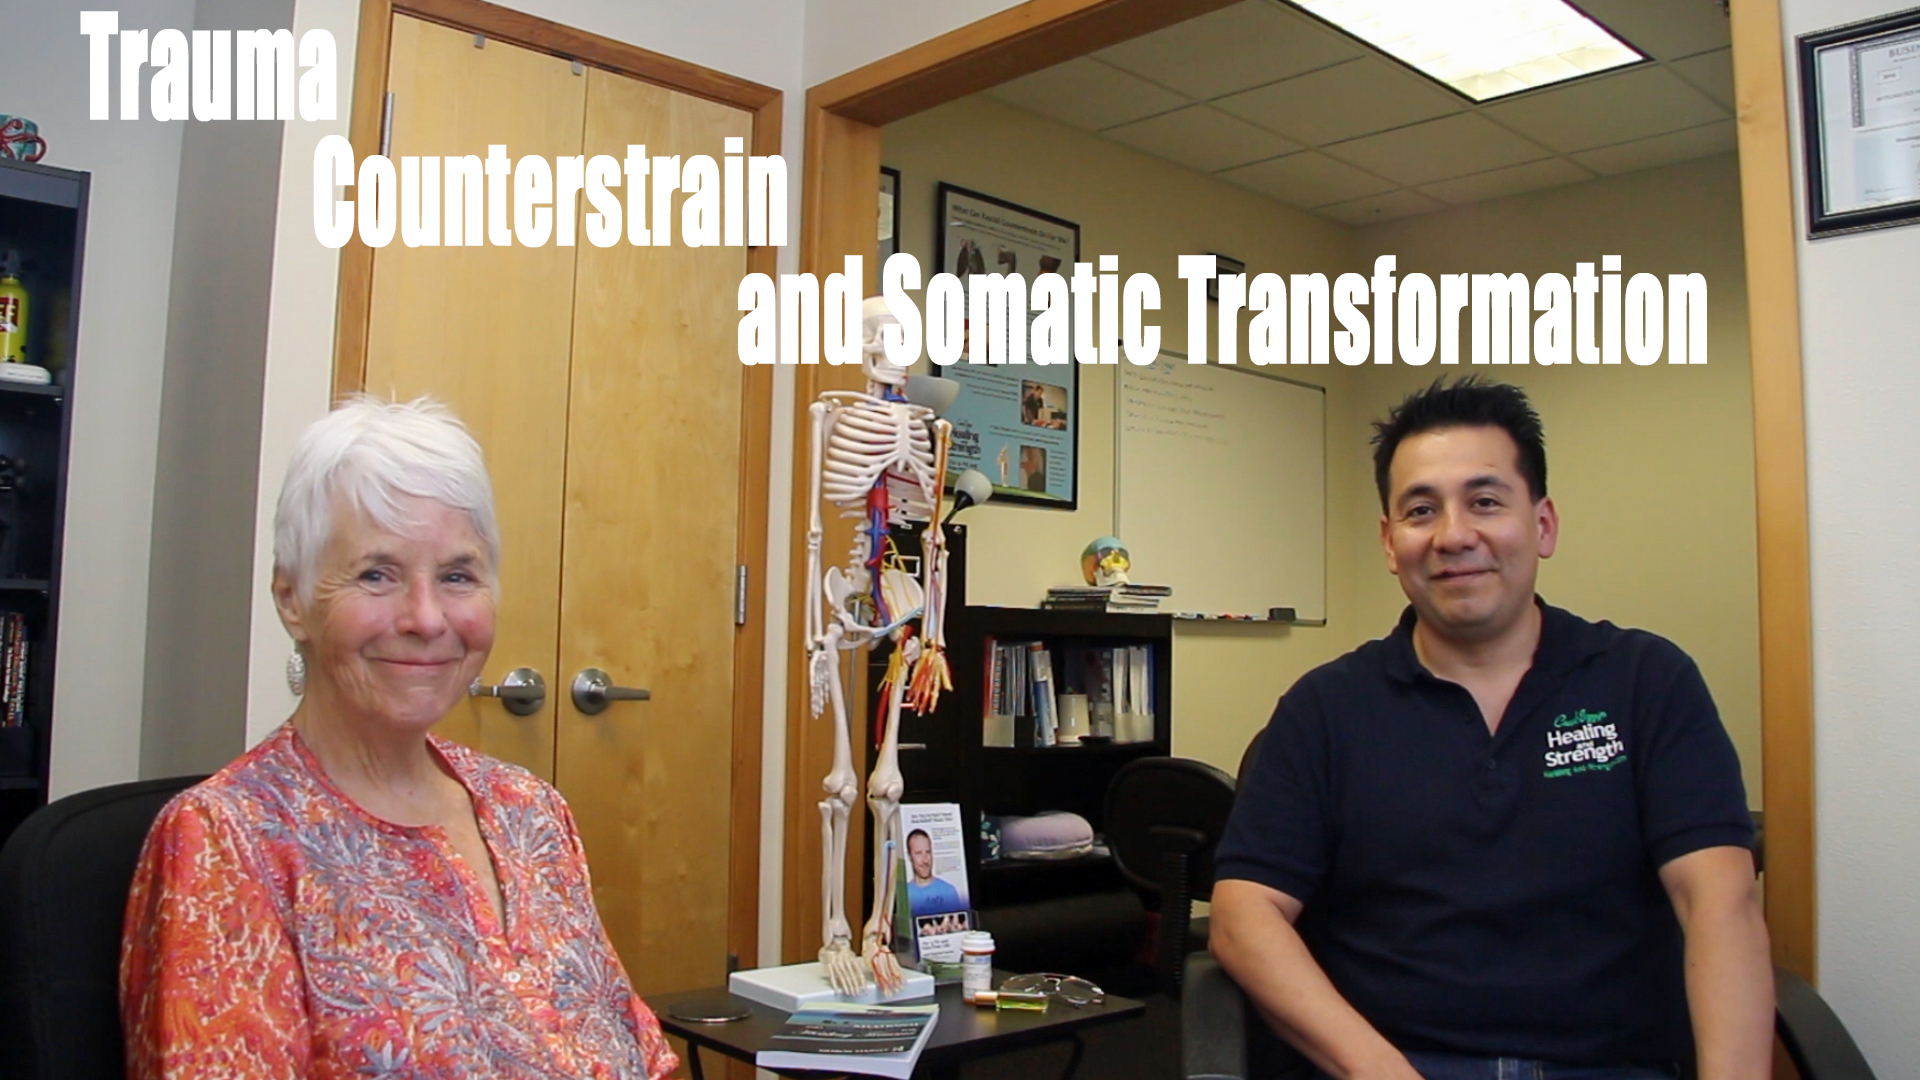 Trauma, Counterstrain, and Somatic Transformation – The Mission of Healing and Protecting the Patient and the Therapist